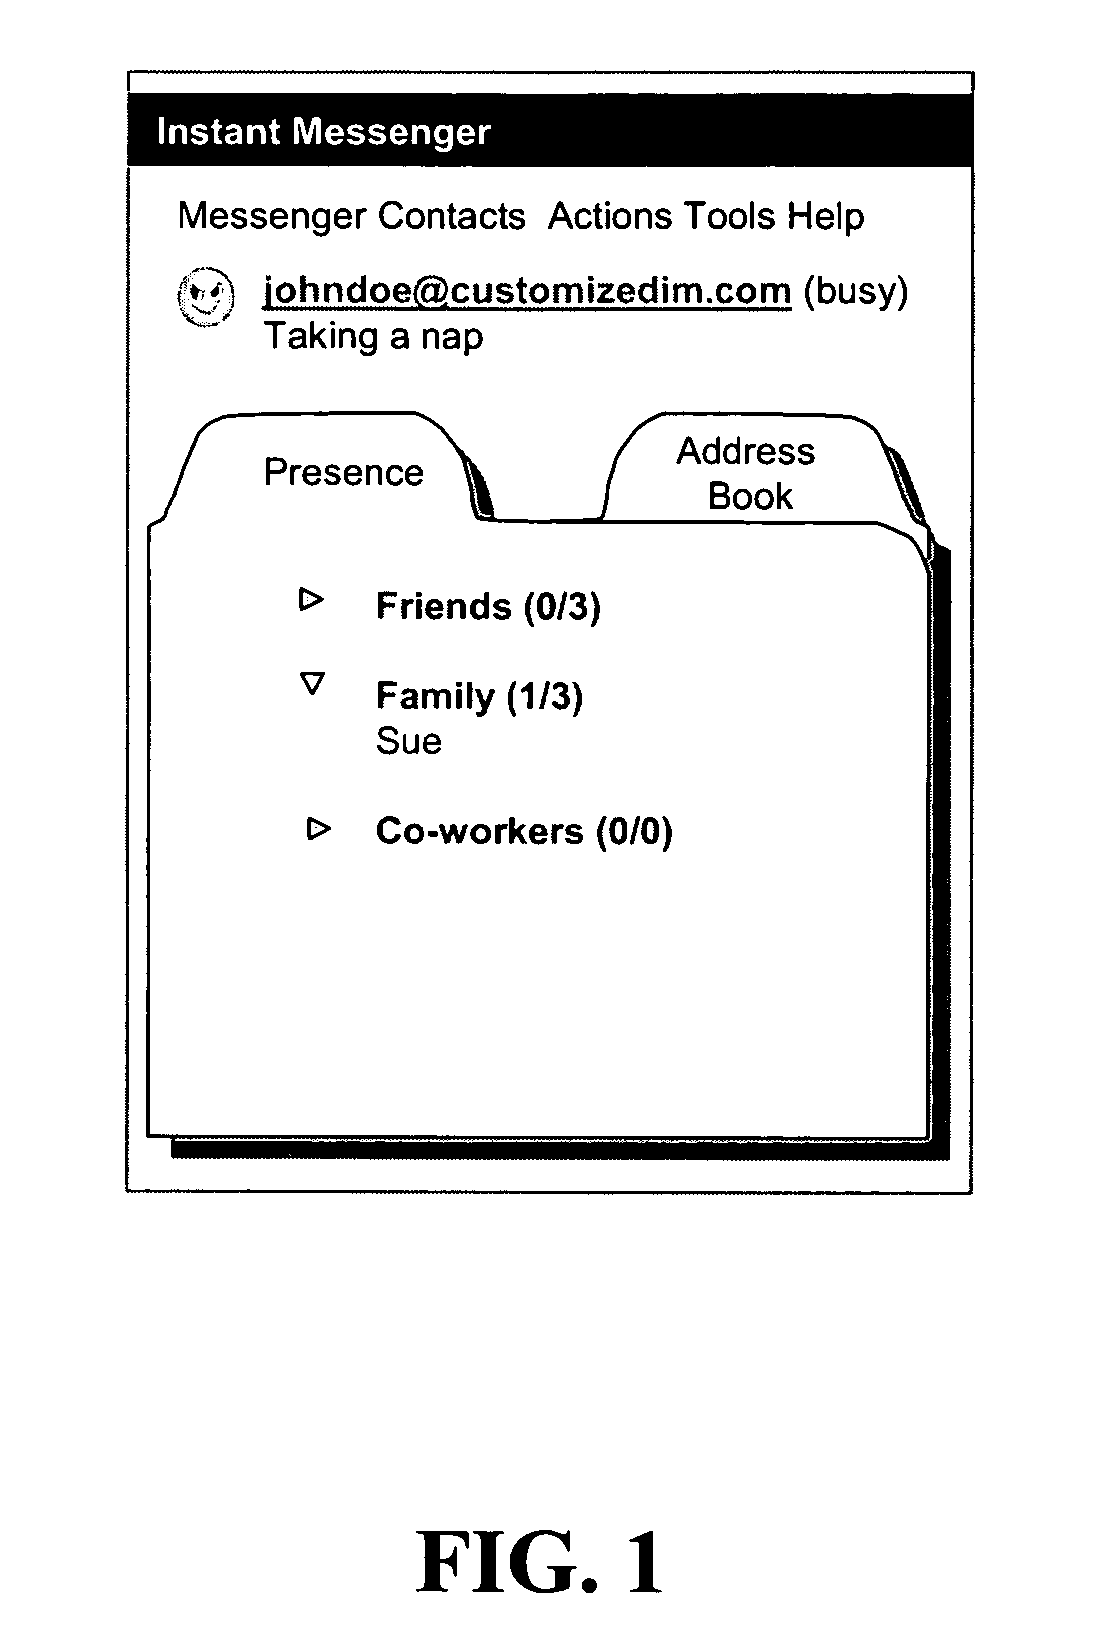 Systems and methods for customized instant messaging application for displaying status of measurements from sensors